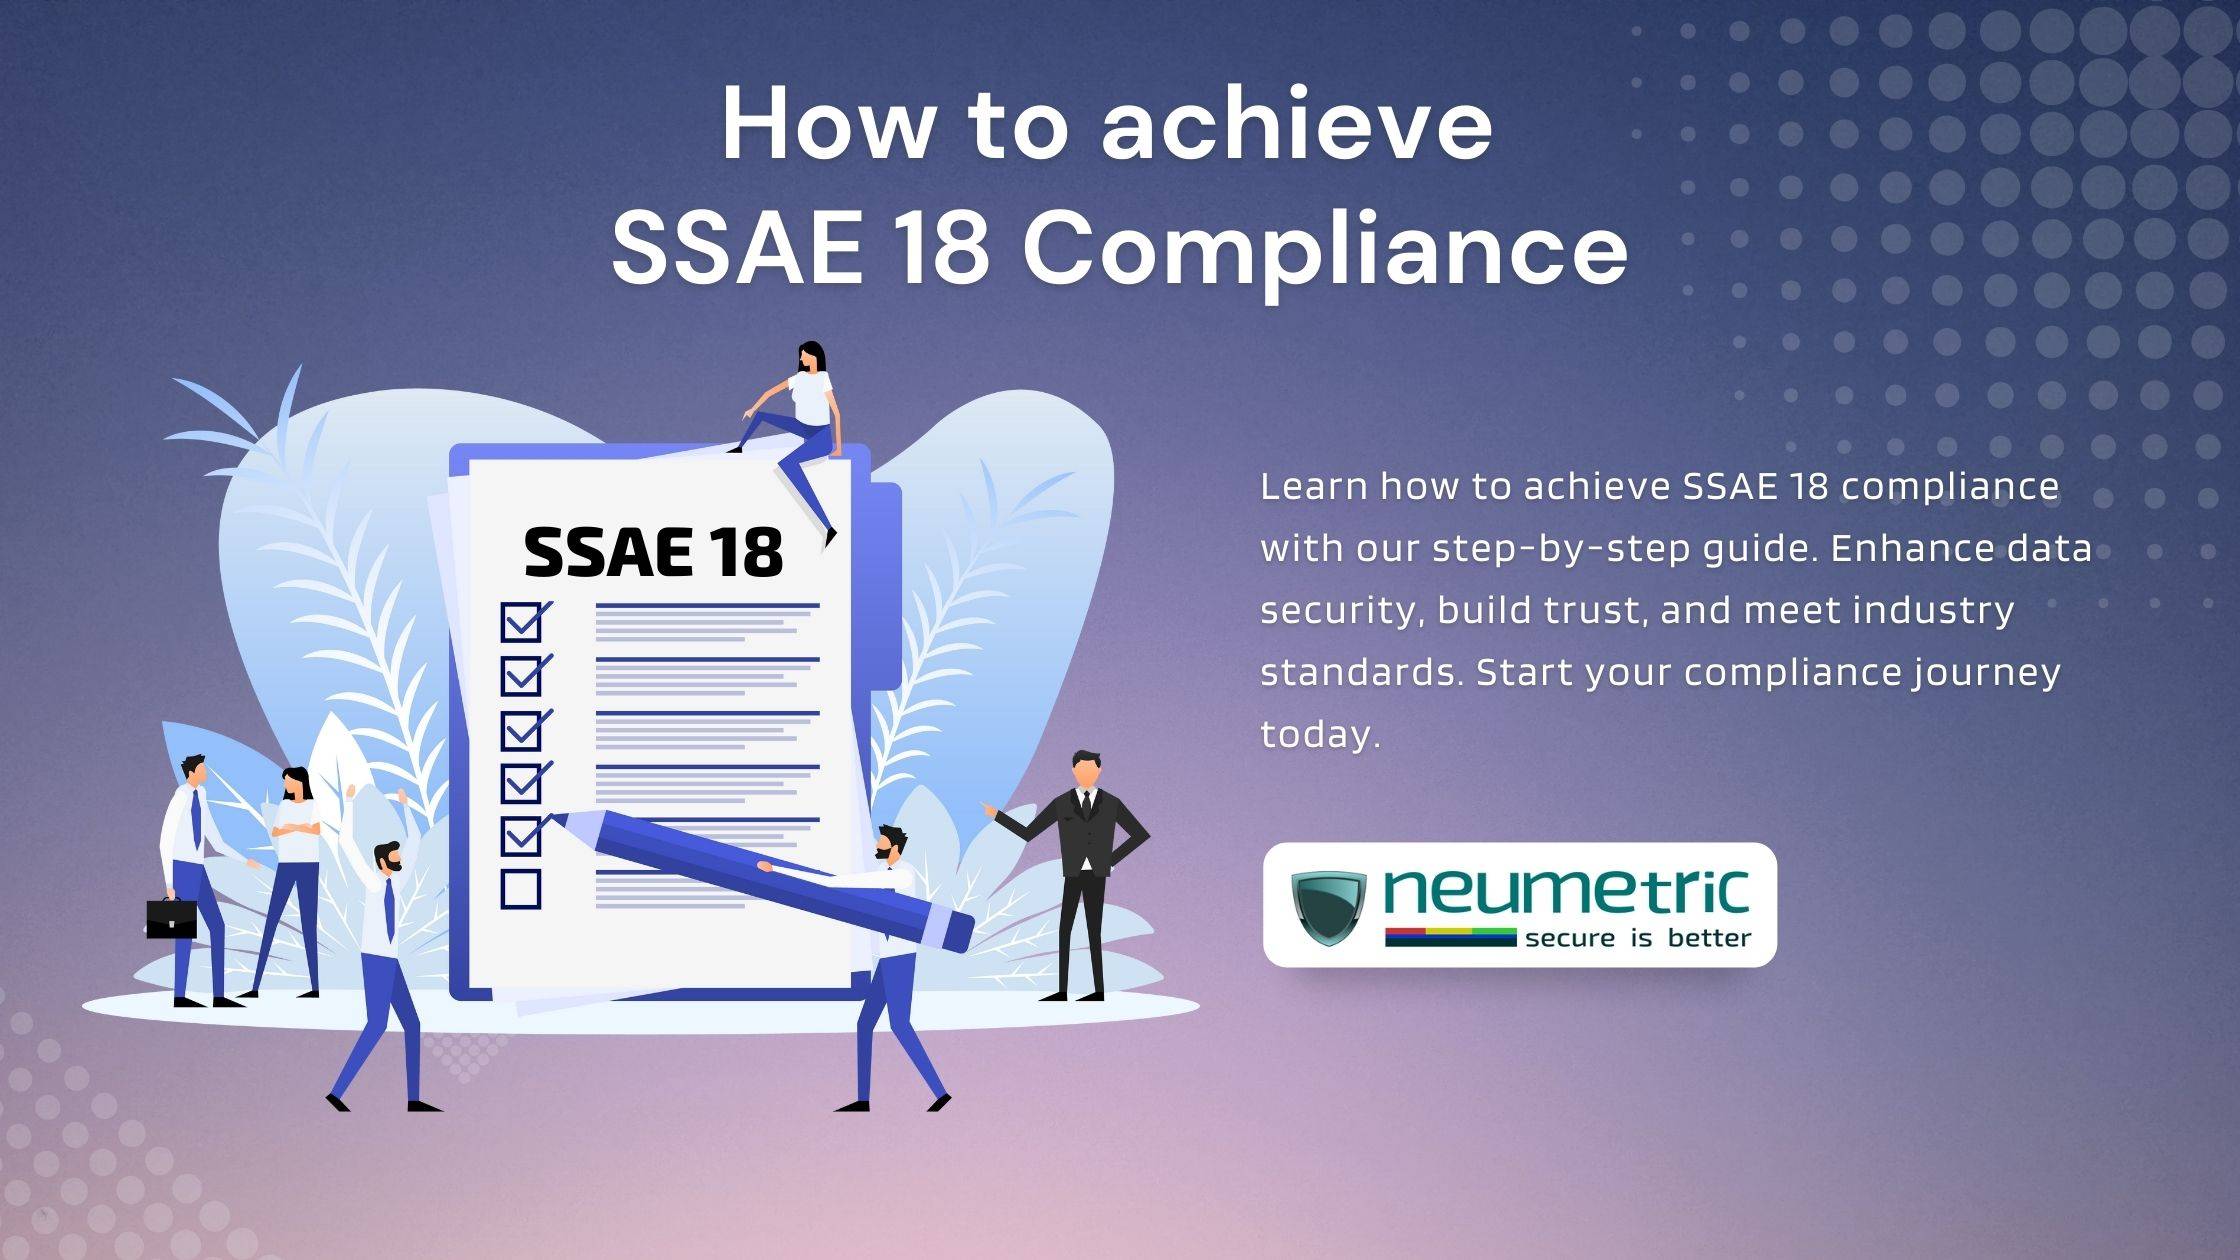 How to achieve SSAE 18 Compliance?